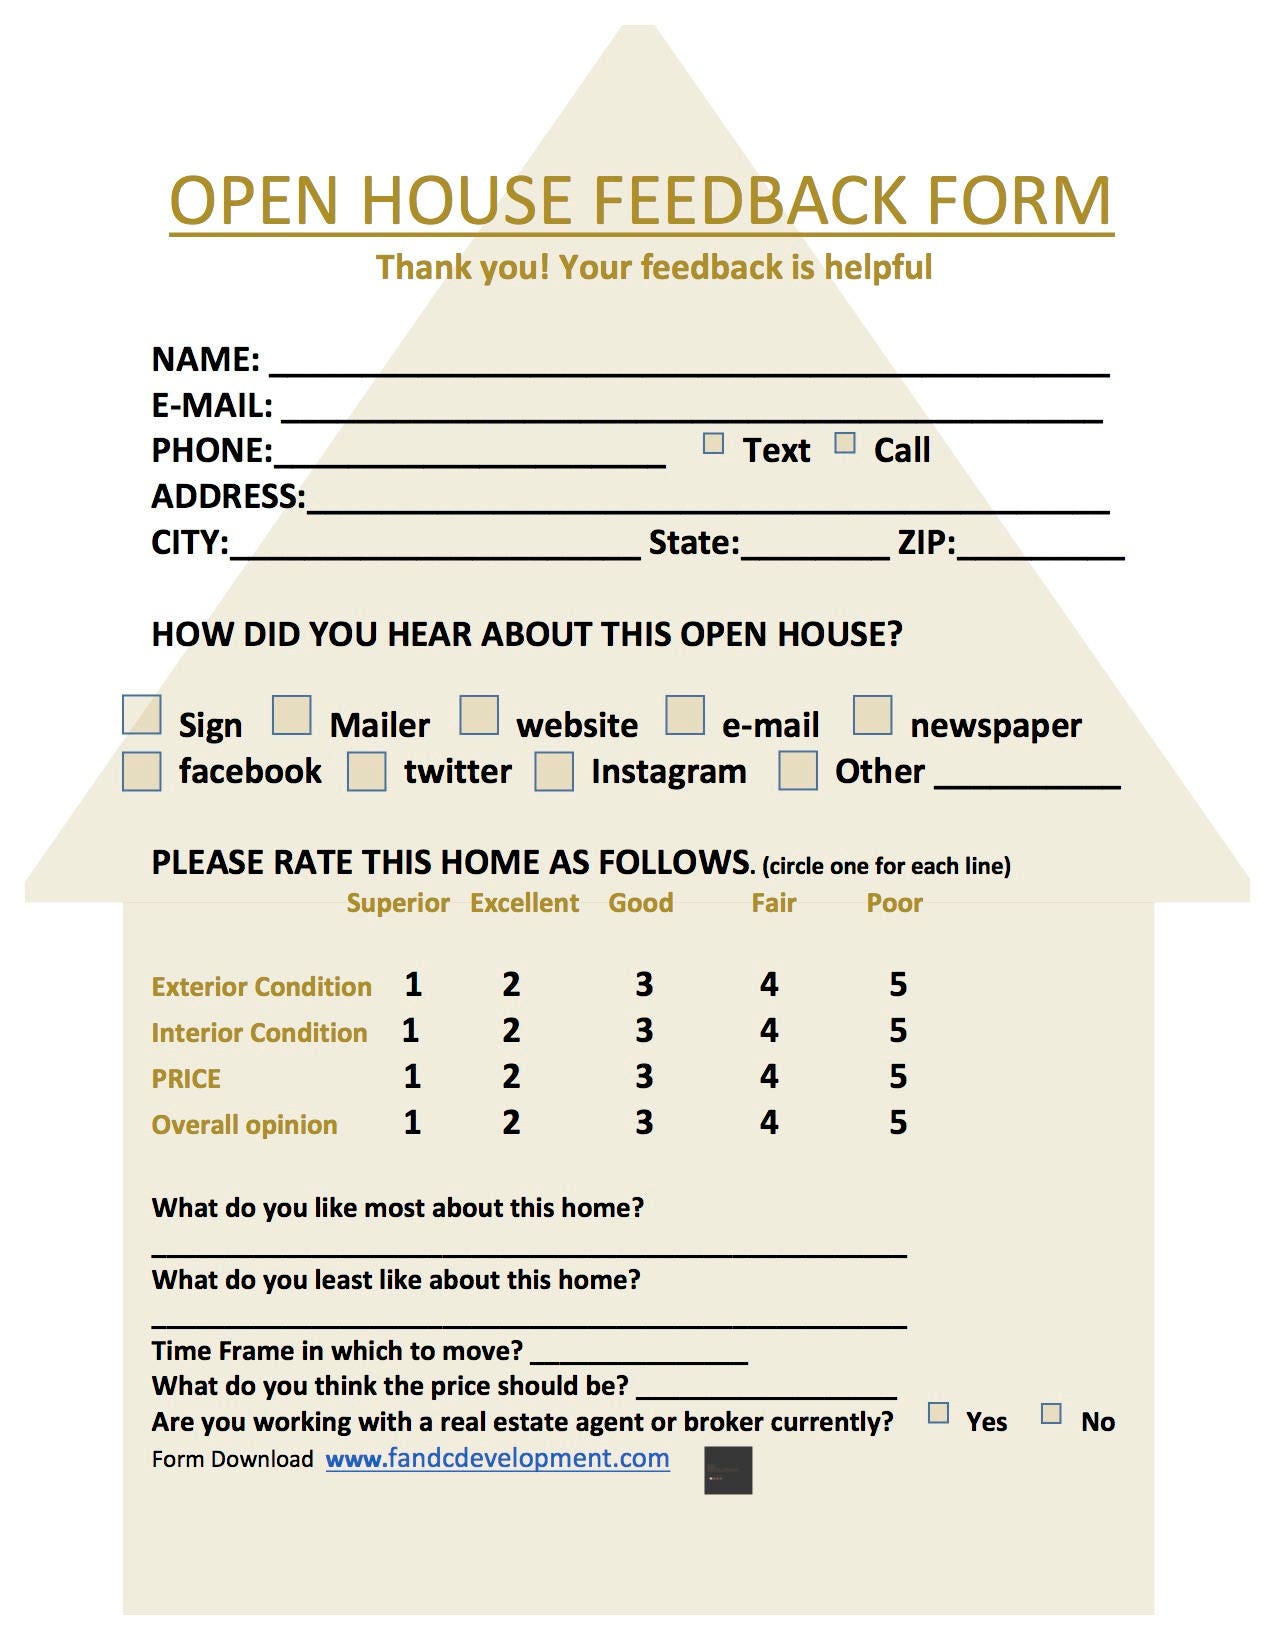 Real estate forms open house feedback form open house sign